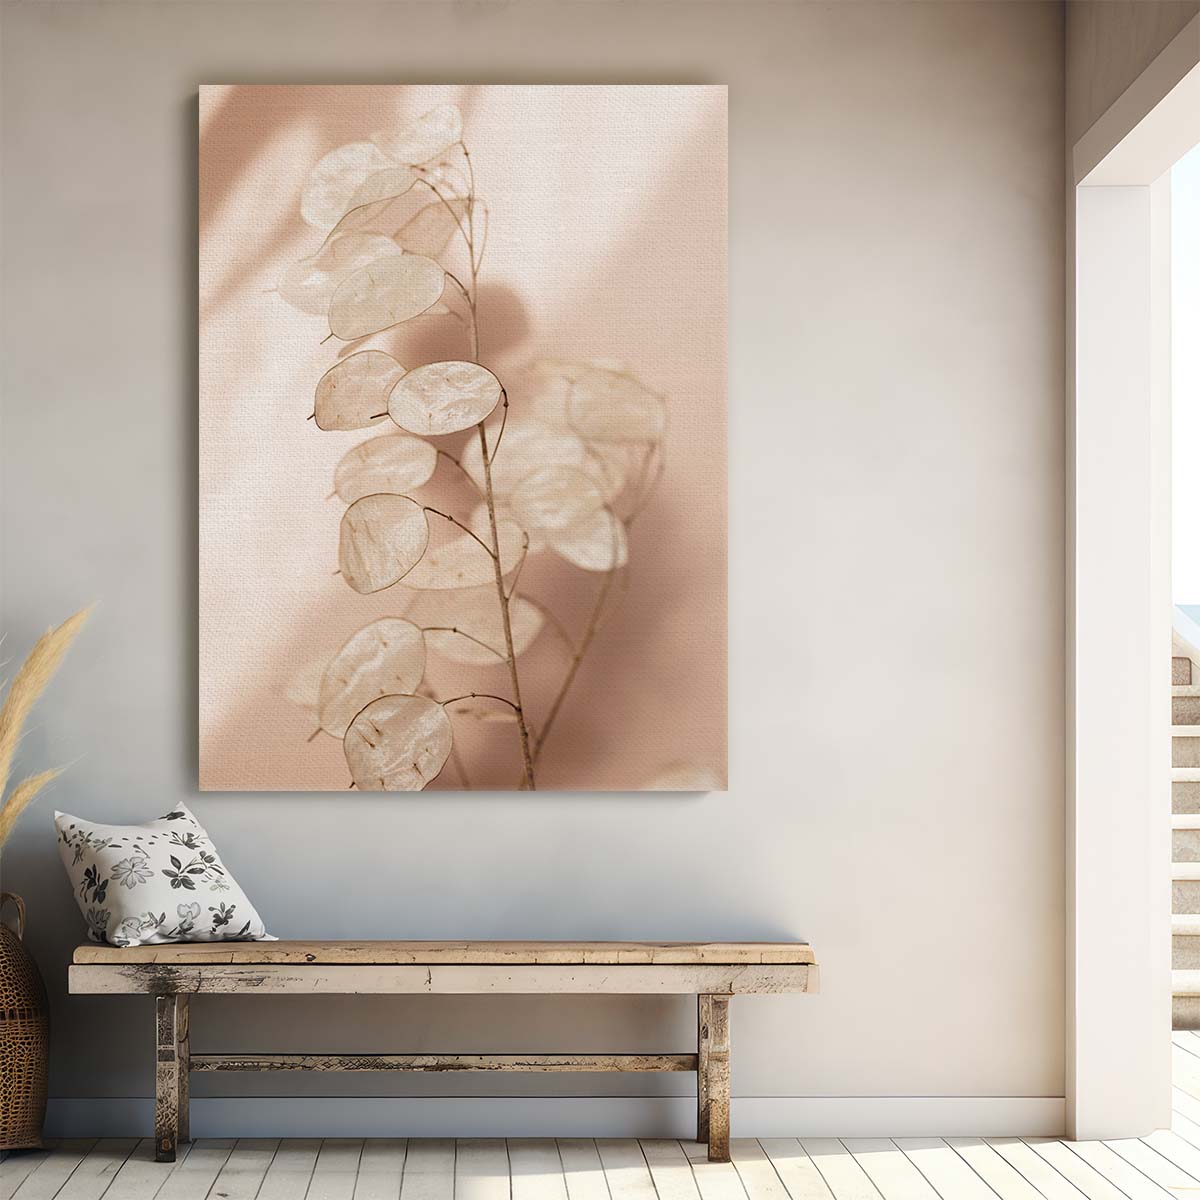 Boho Pastel Beige Floral Photography by Mareike Bohmer by Luxuriance Designs, made in USA